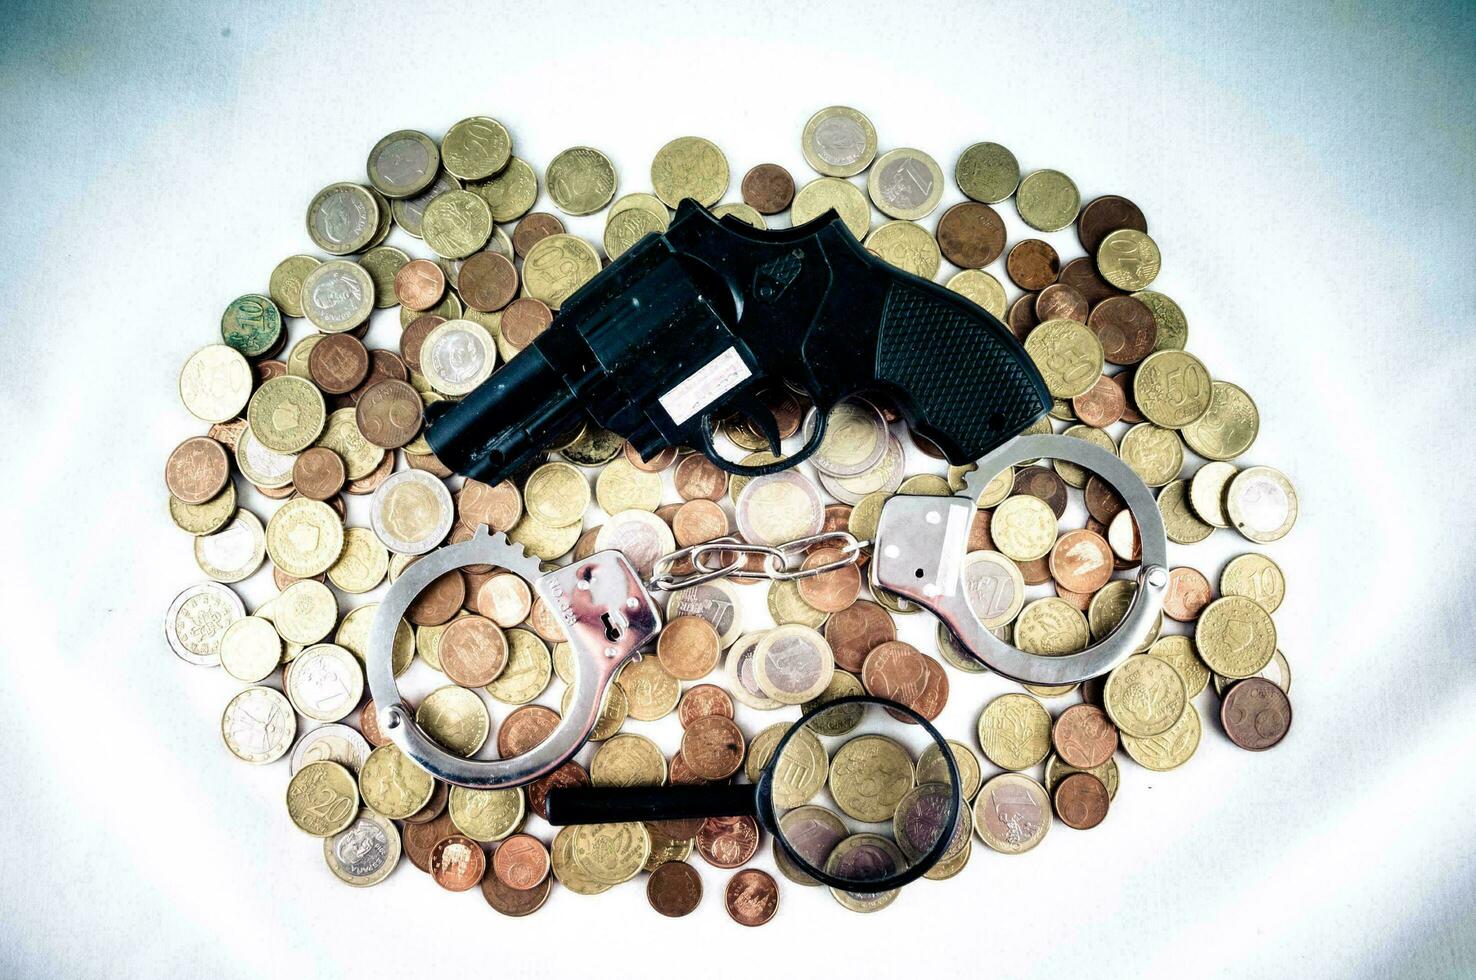 a gun, magnifying glass and handcuffs on a pile of coins photo